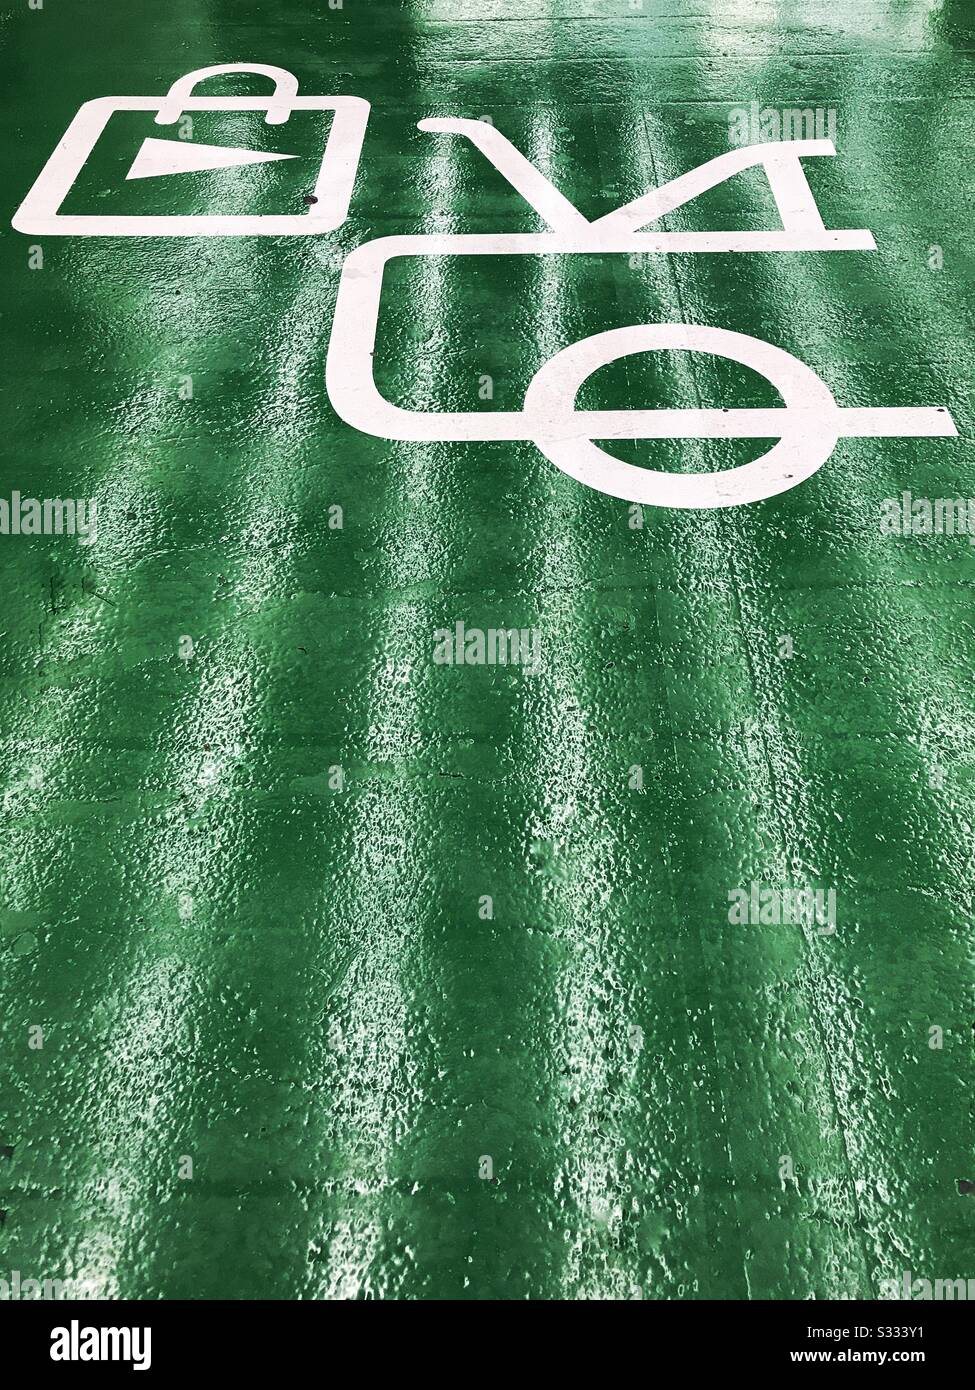 Car parking space reserved for owners of electric or hybrid vehicles who wish to charge their cars whilst they go shopping. Stock Photo